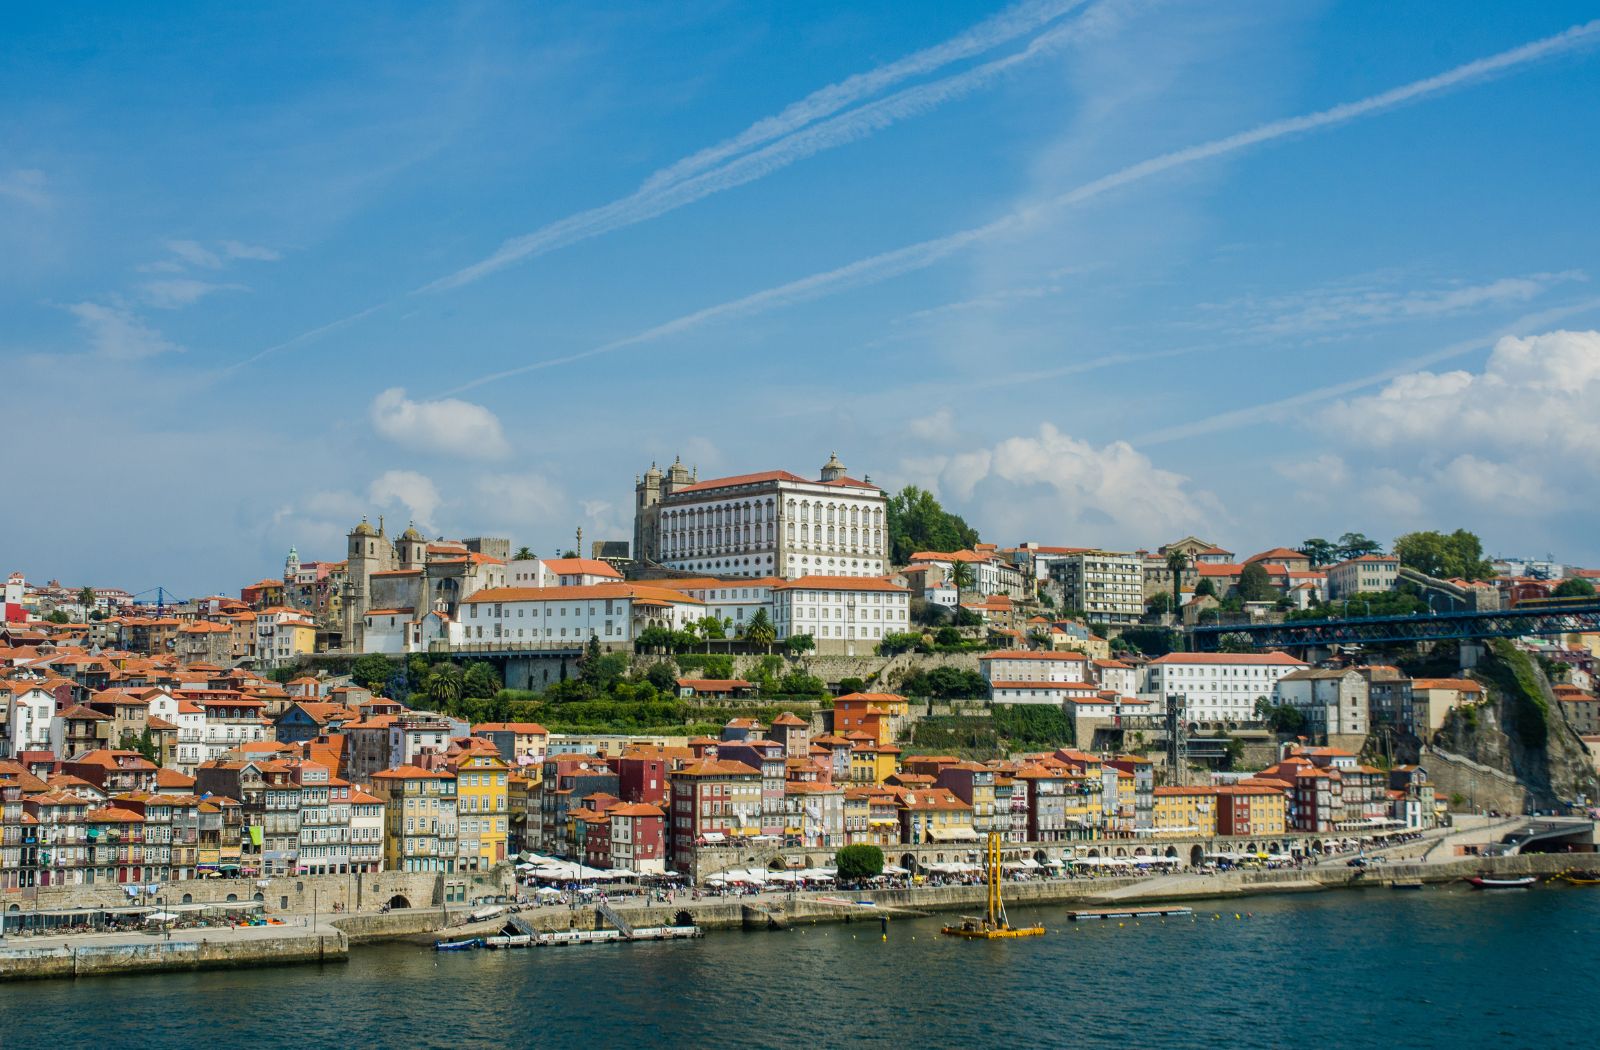 Porto, our favorites so you don’t miss anything!